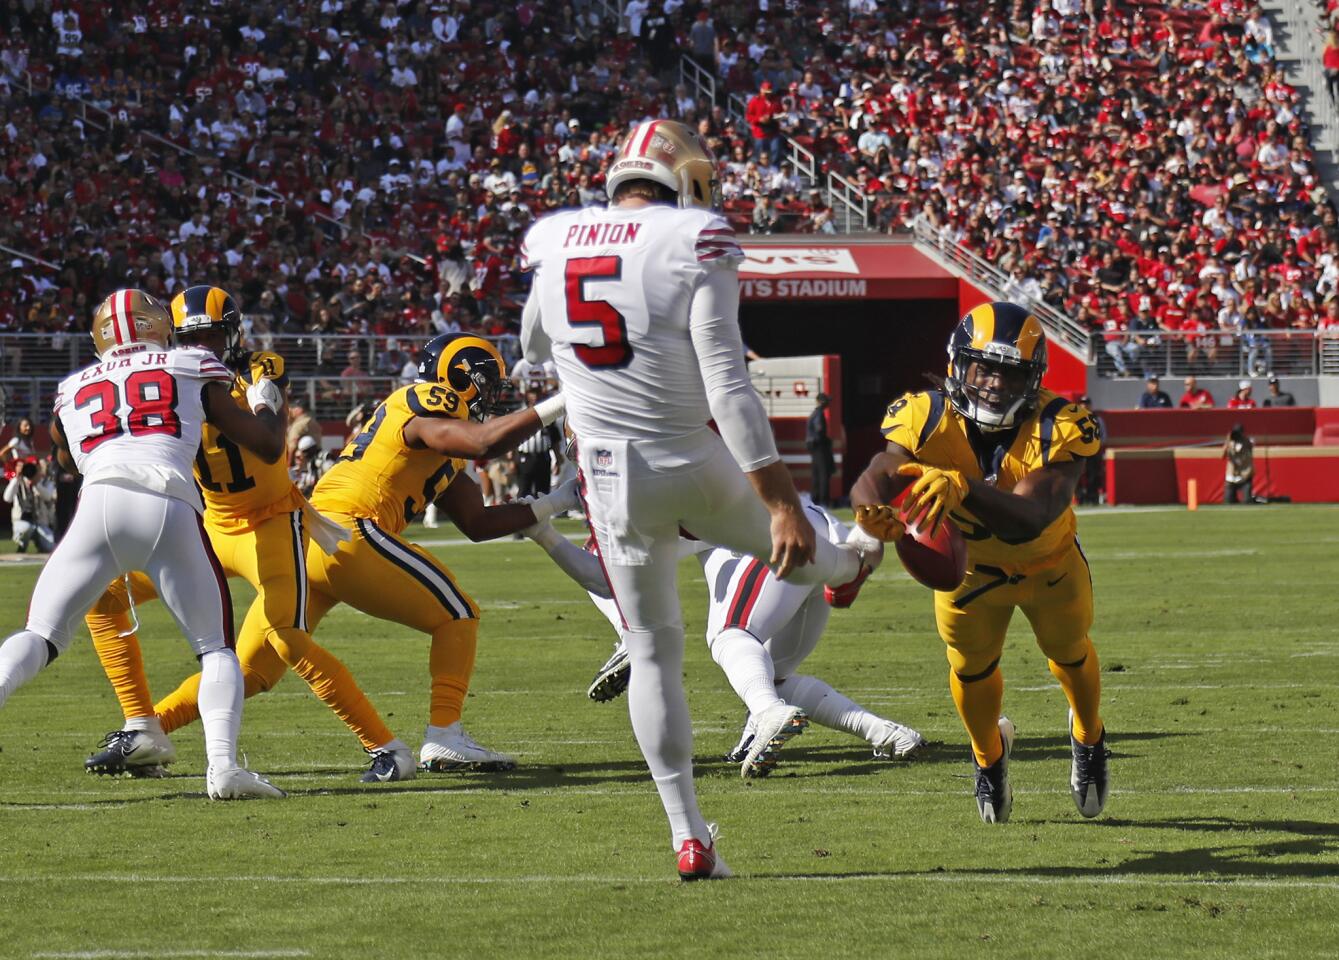 Rams linebacker Cory Littleton (58) blocks a punt by San Francisco 49ers punter Bradley Pinion (5) which led to a safety in the first half at Levi's Stadium on Sunday in Santa Clara.